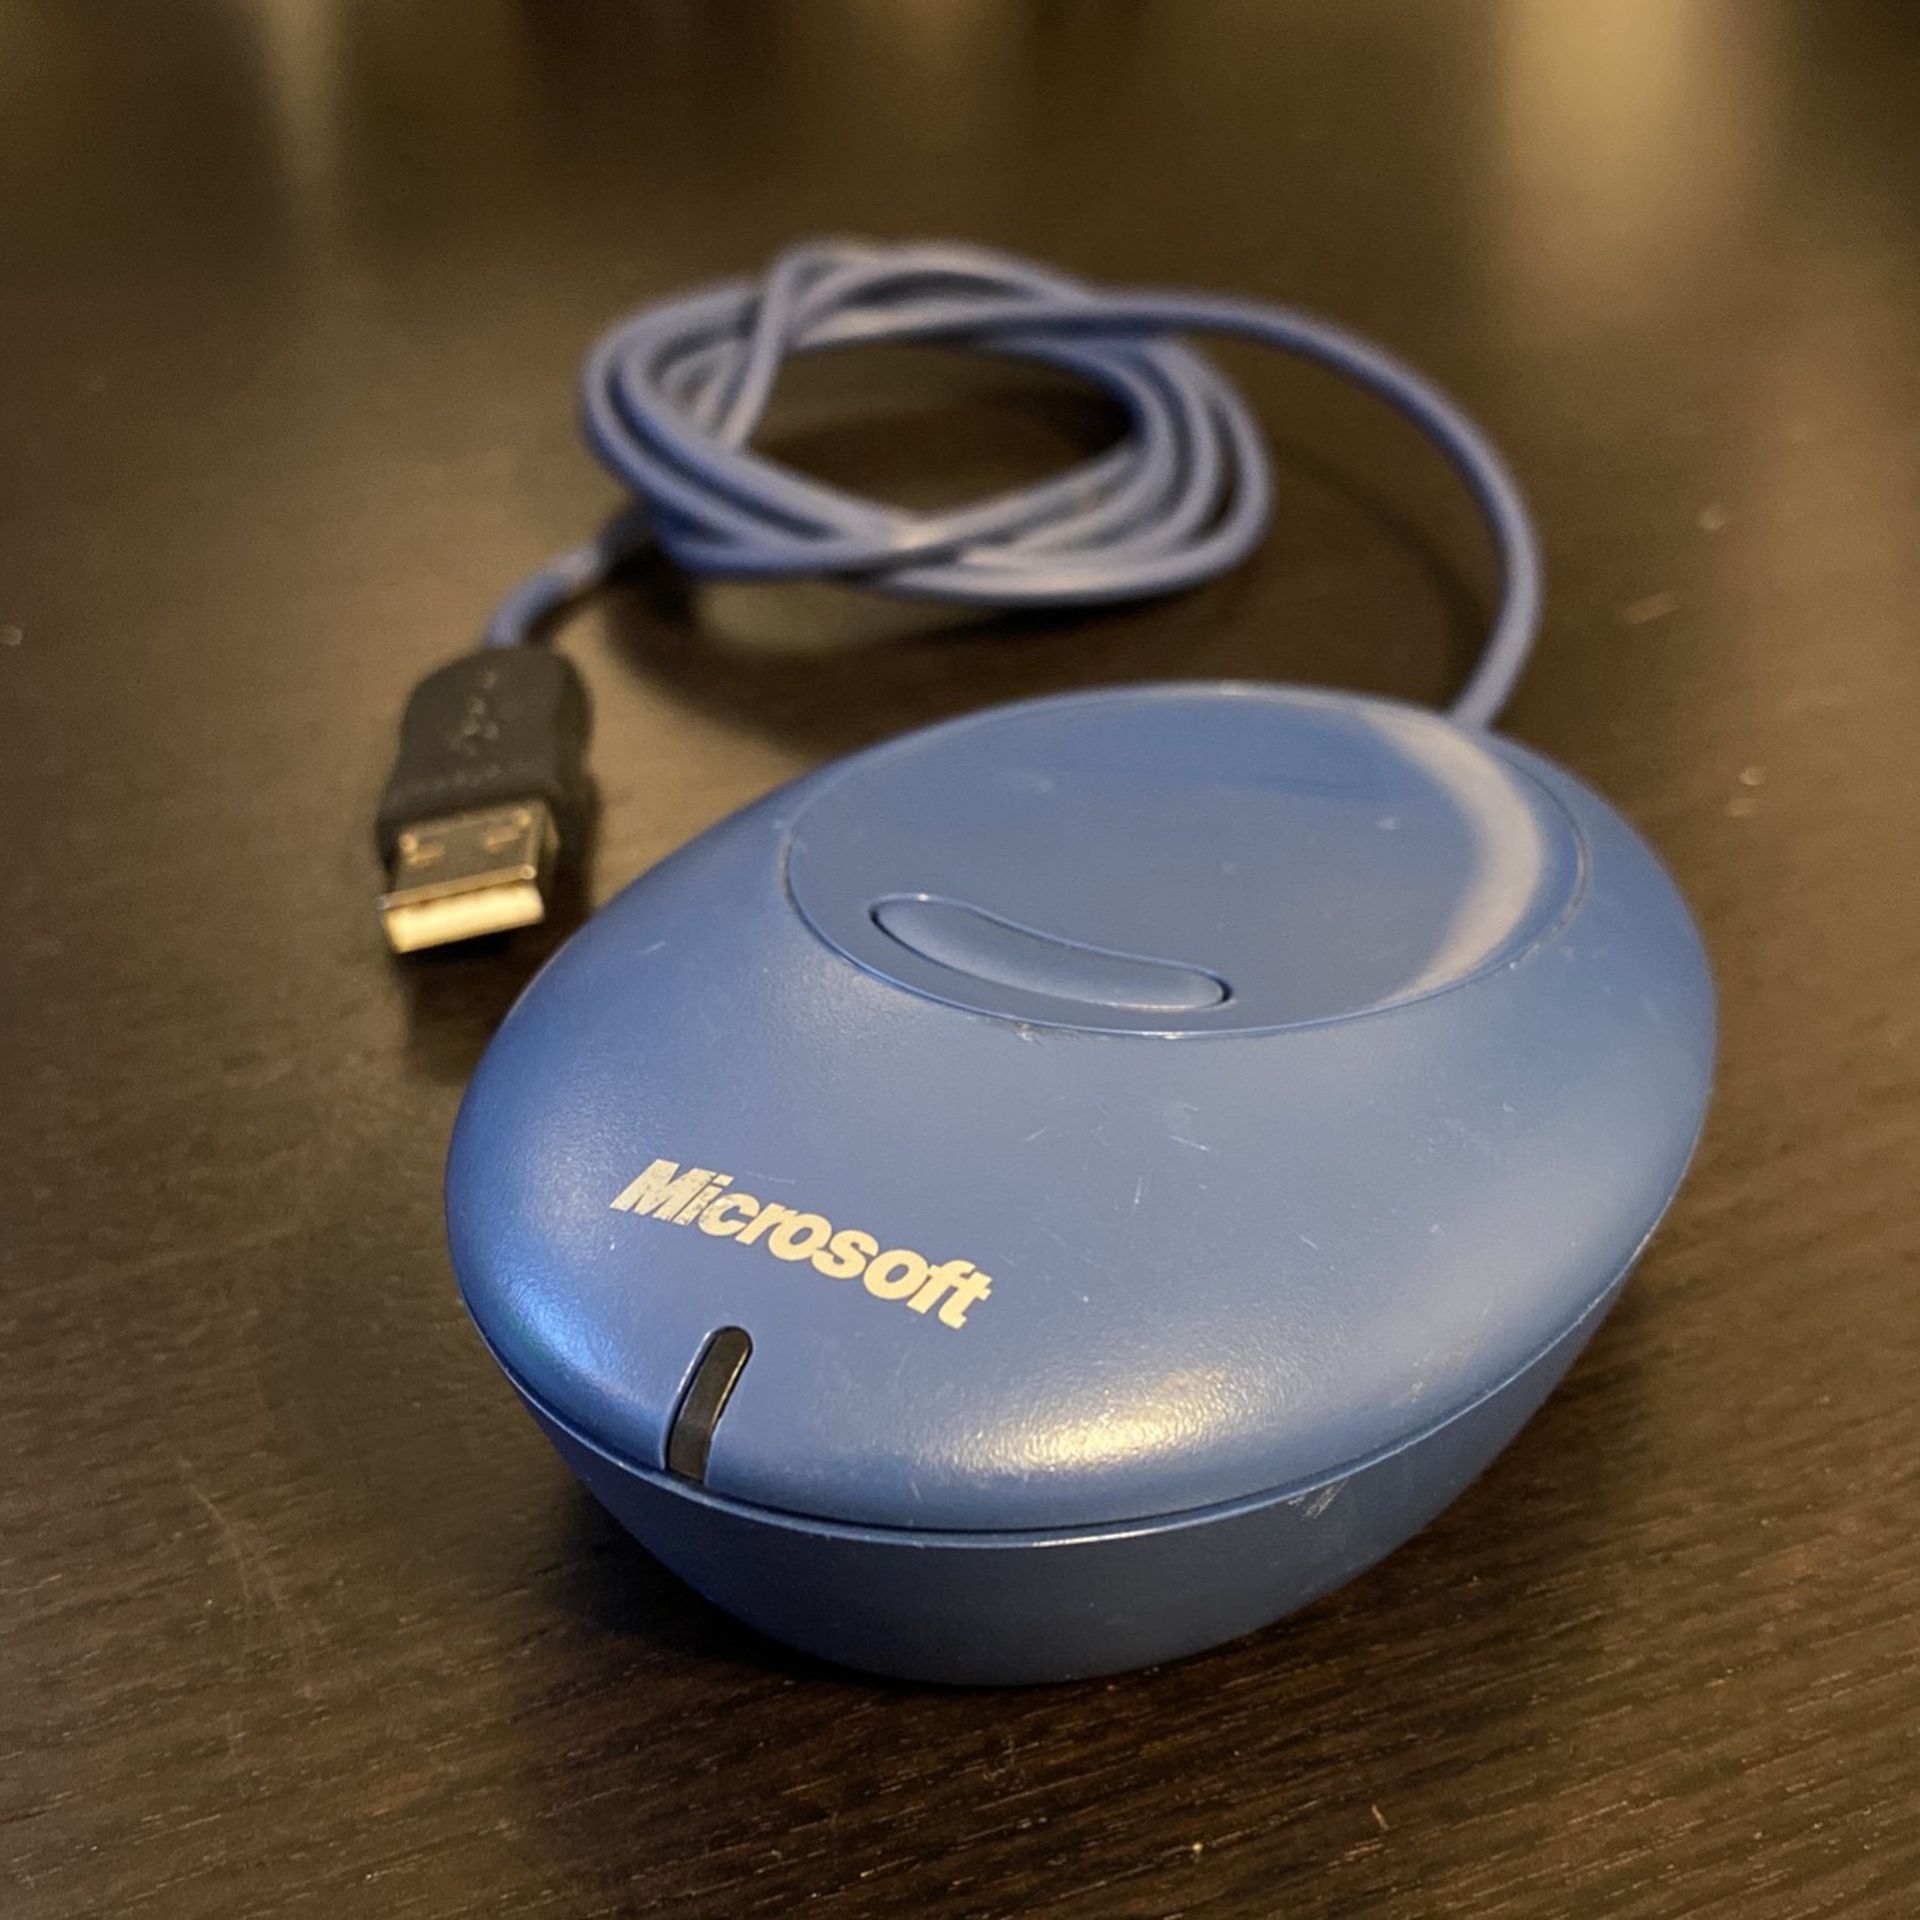 Microsoft Wireless Optical Mouse Blue Receiver